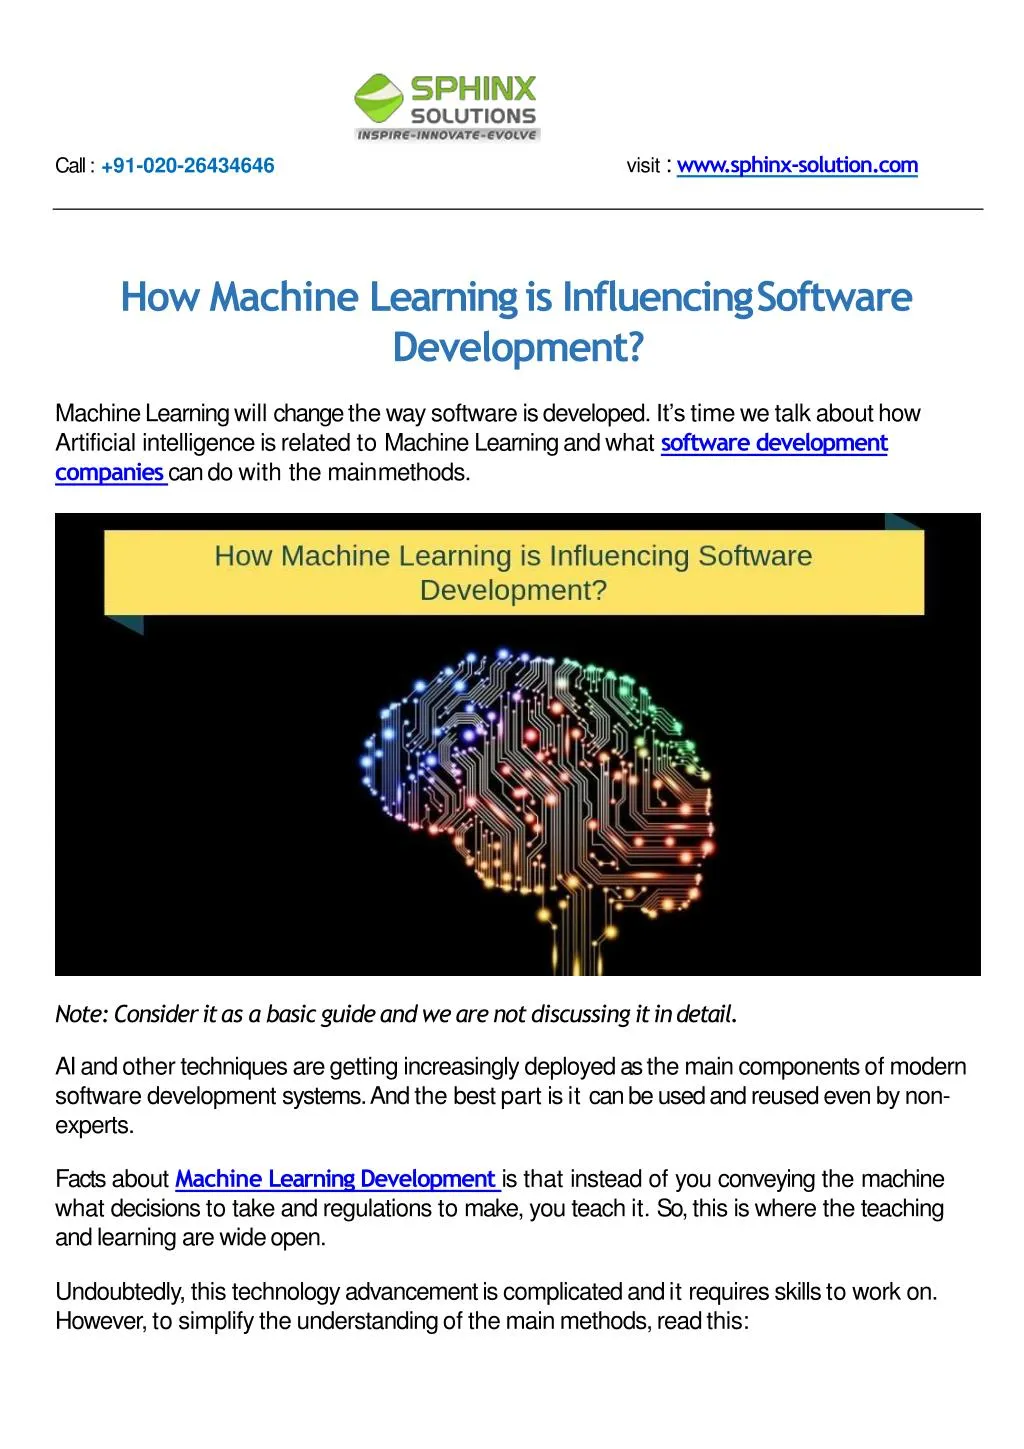 how machine learning is influencing software development